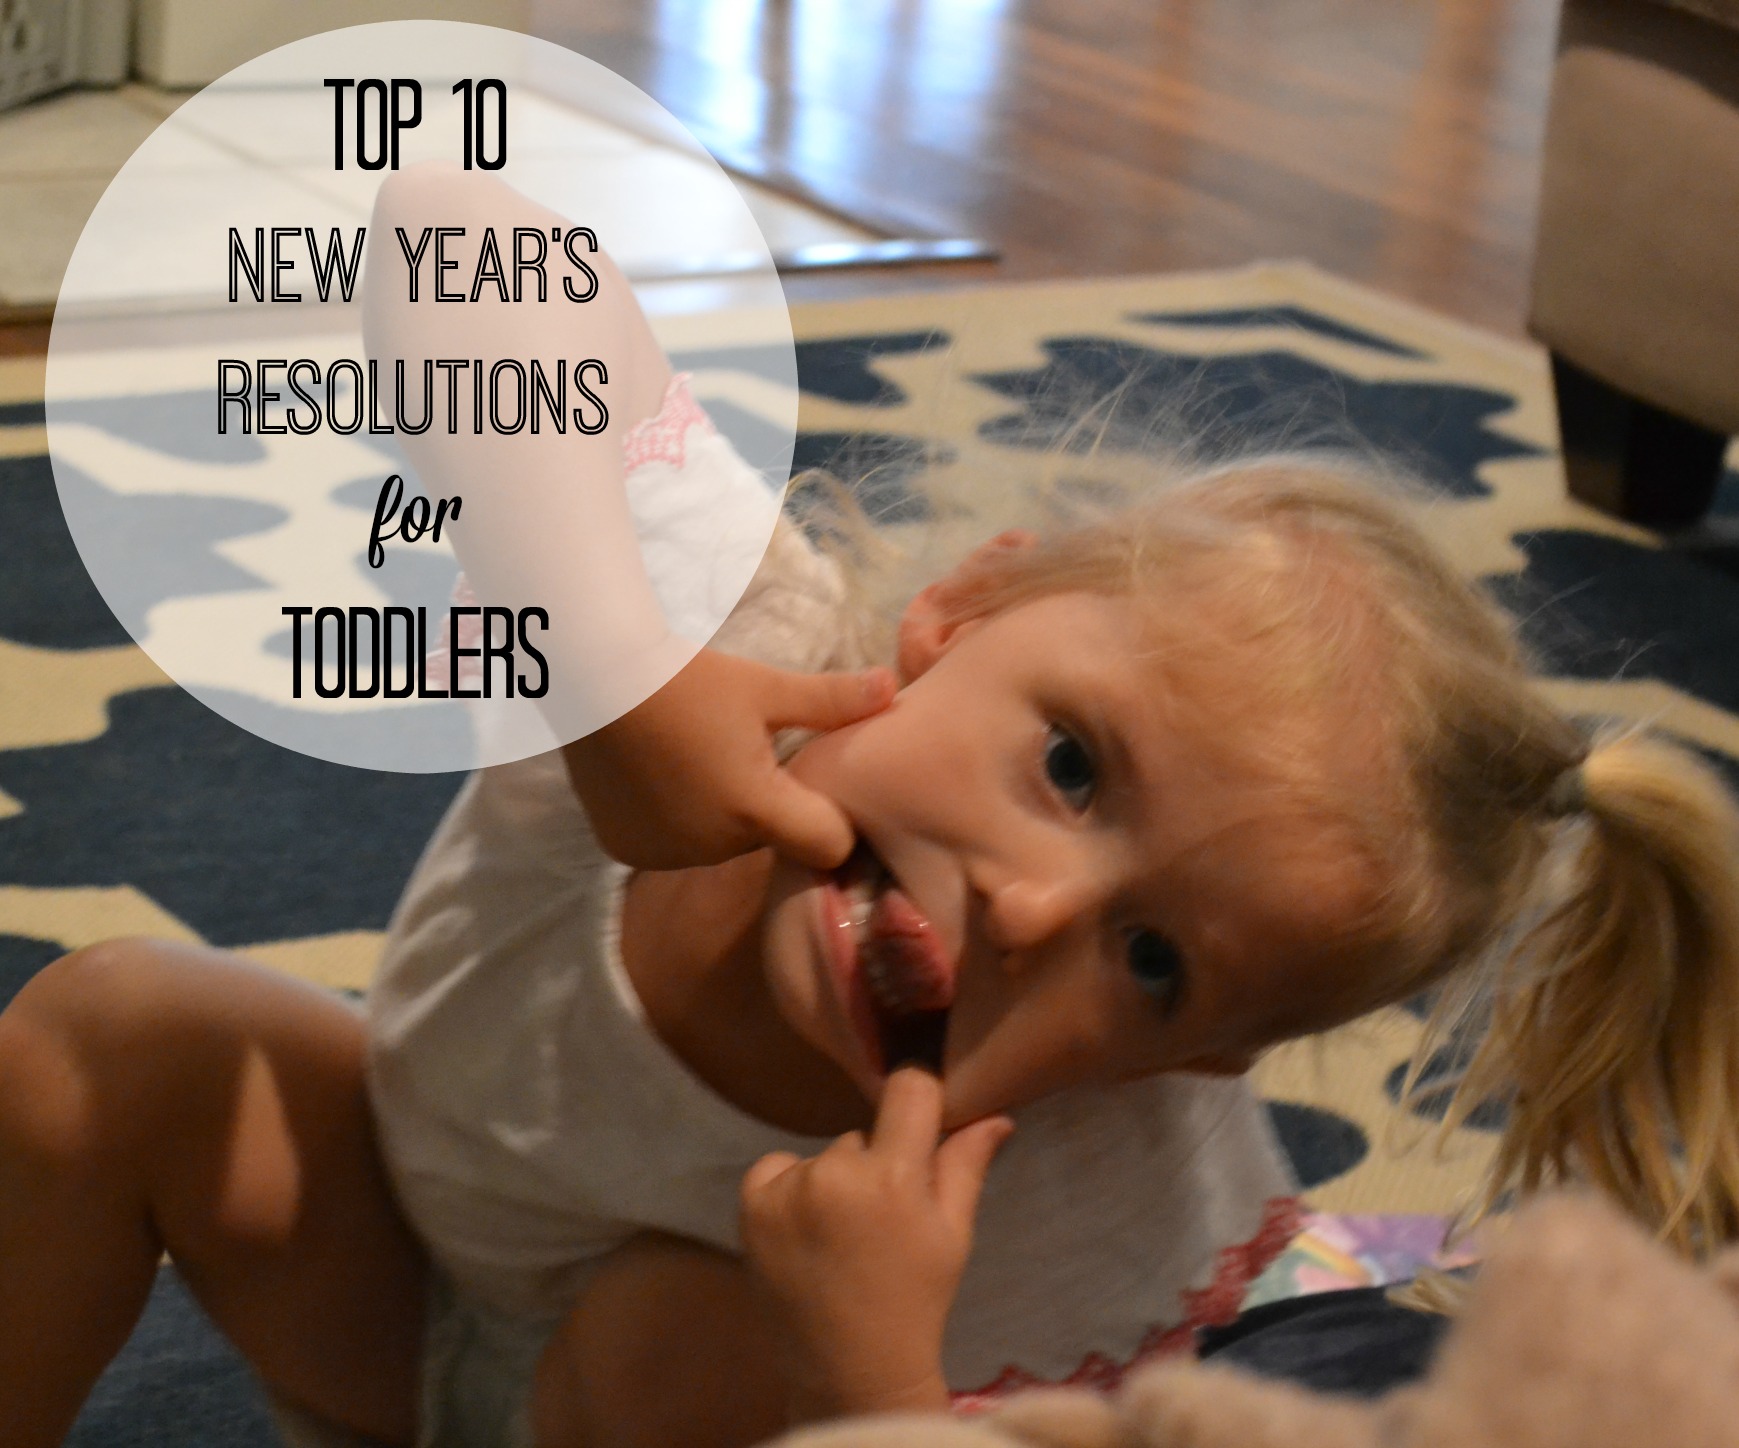 Top 10 New Year’s Resolutions for Toddlers